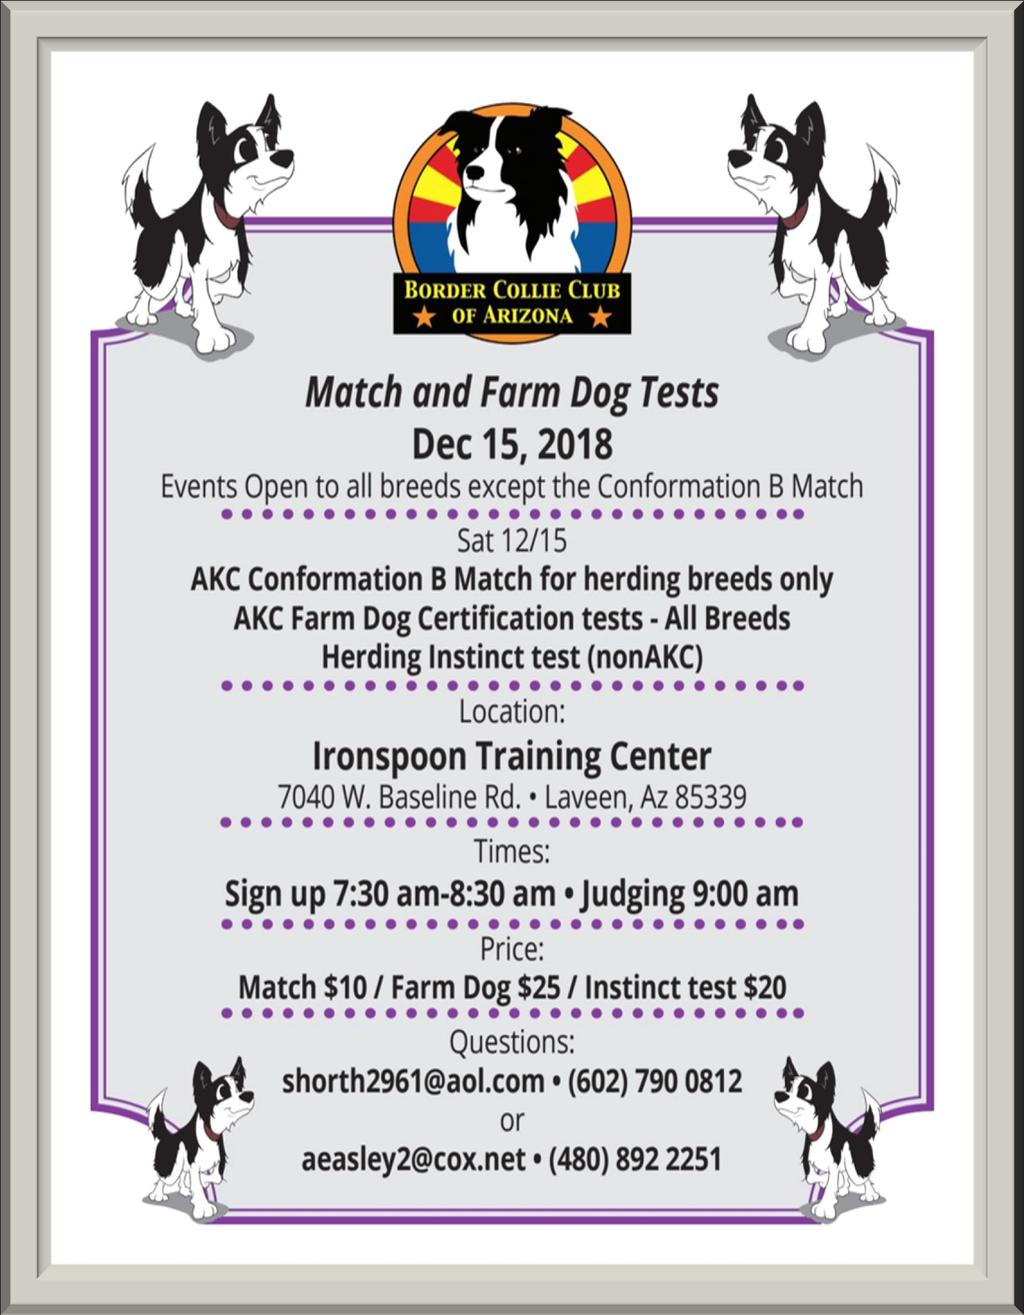 JOIN US FOR THIS DAY!! We need BCCAZ members to participate with their dogs!